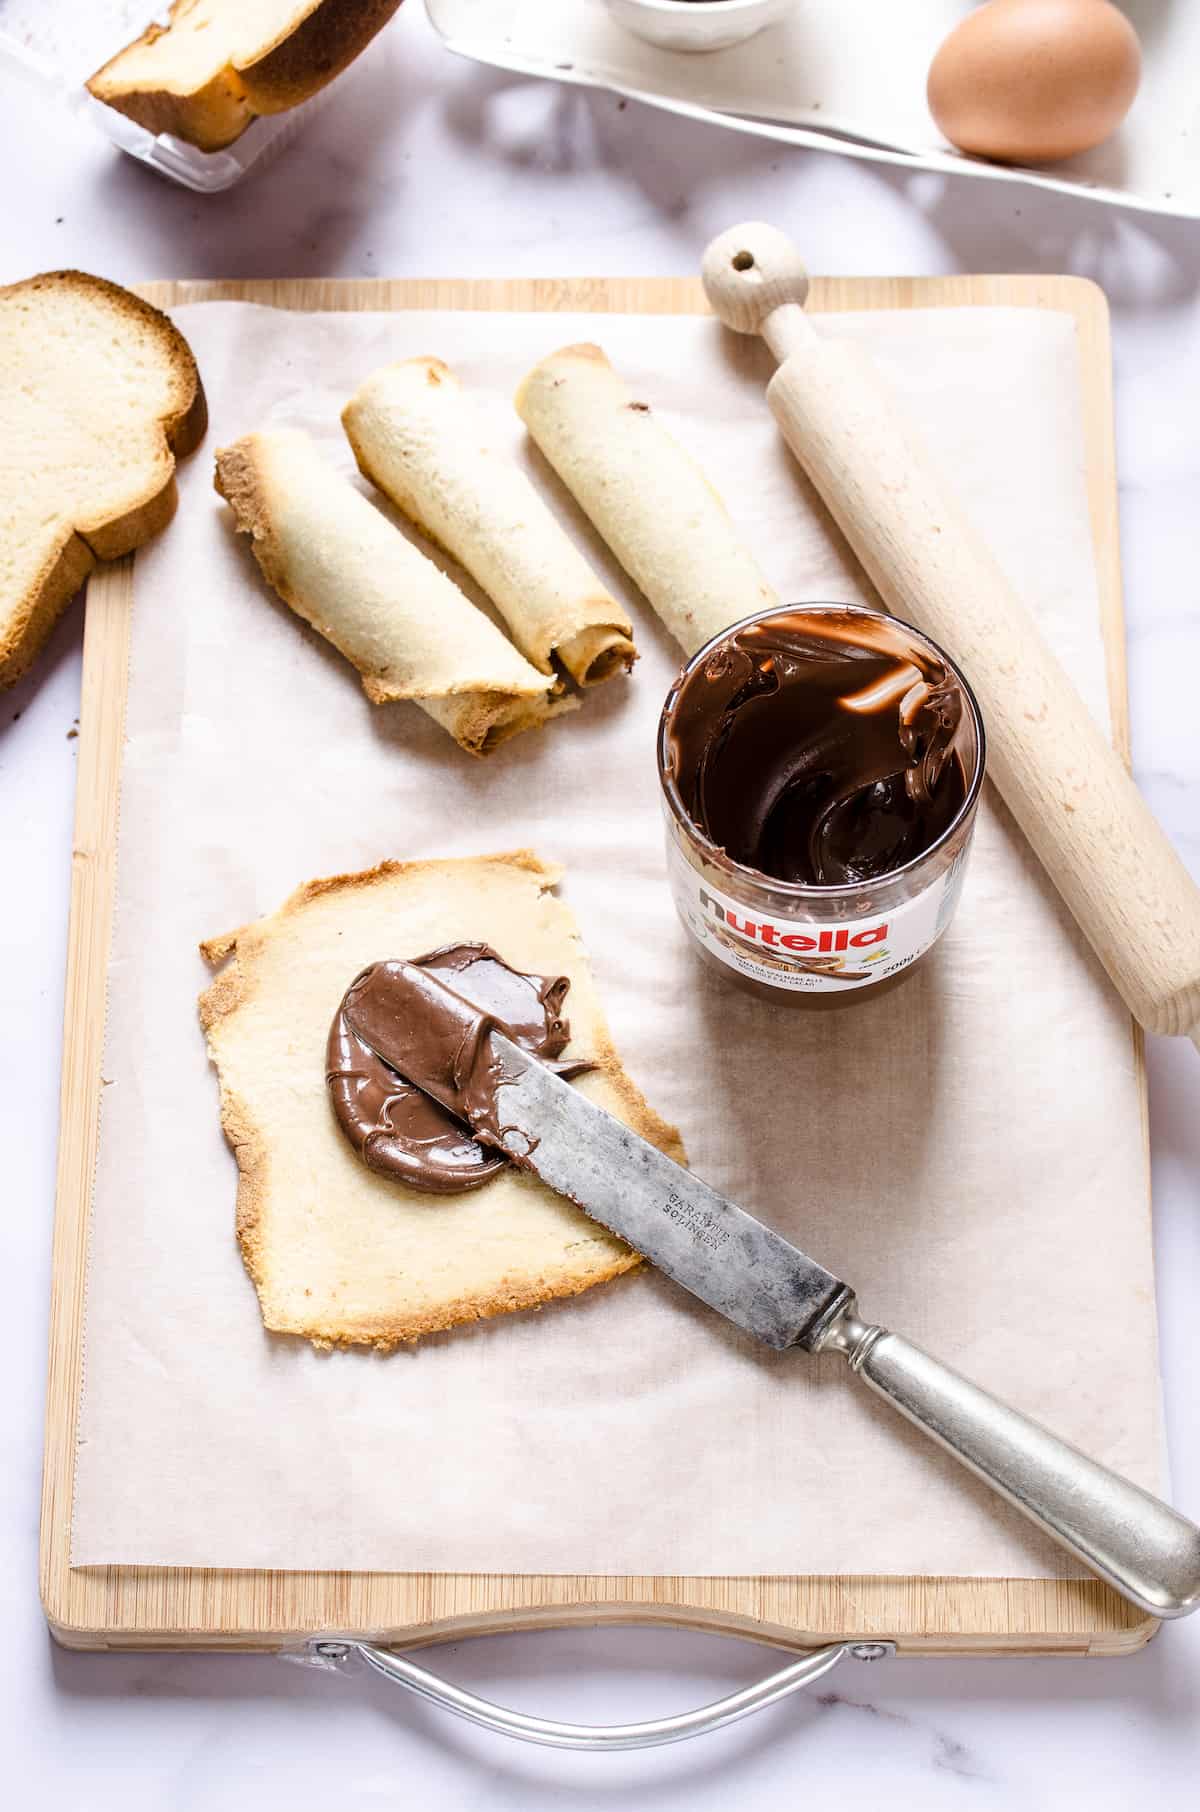 Nutella being spread onto a flattened piece of bread on top of a cutting board